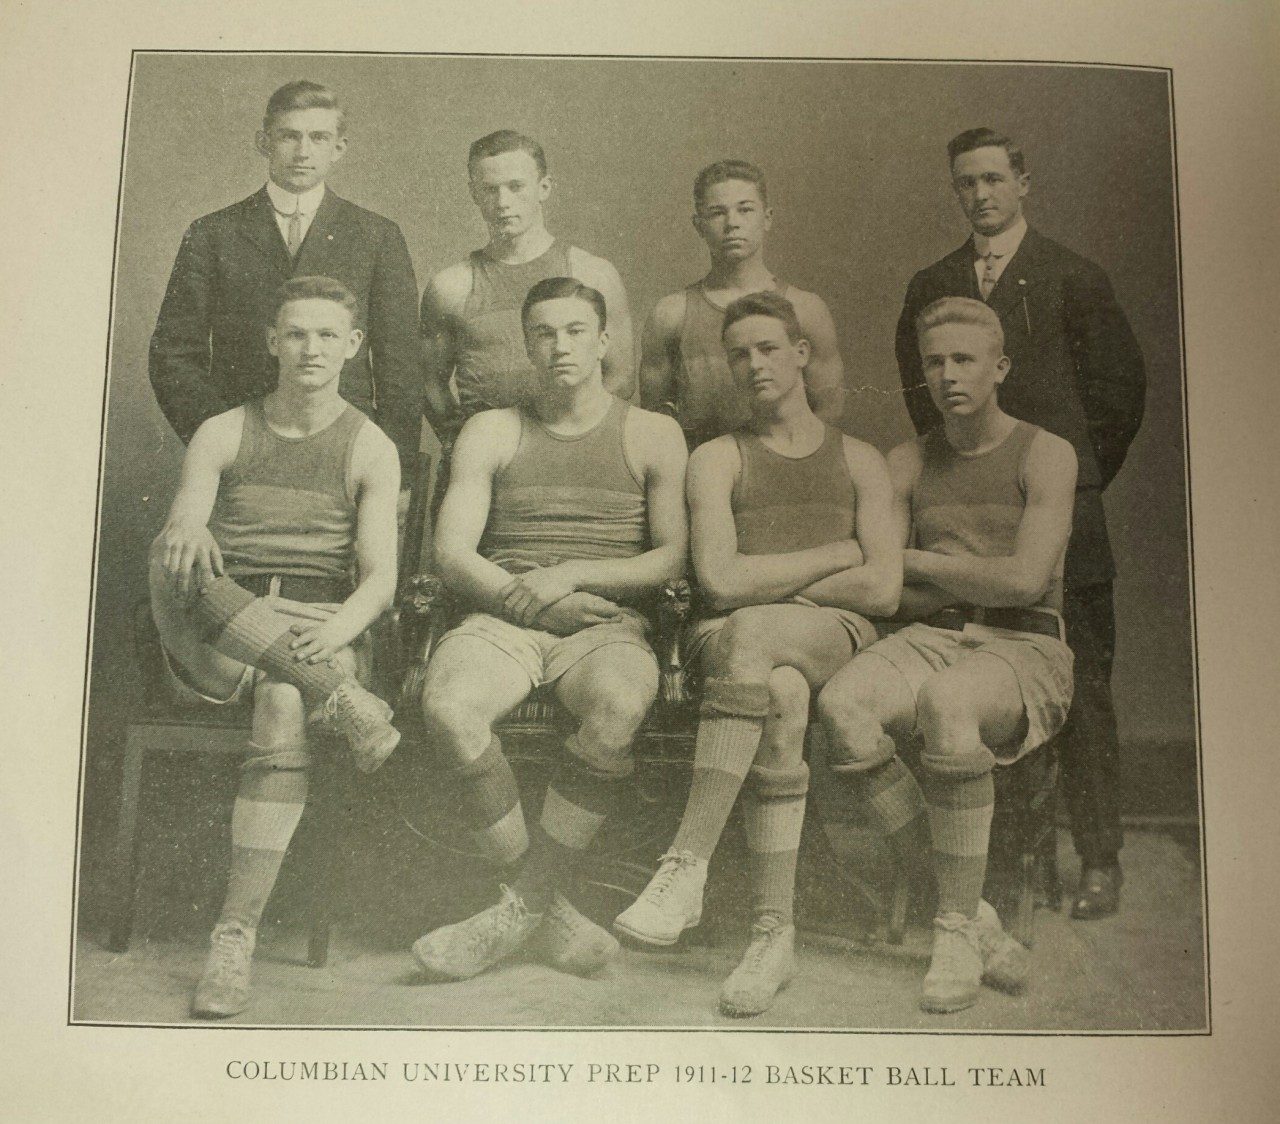 Columbia Preparatory School Basketball Team, 1911-12; Rudolph (Rudy) Scholz, 3rd from left in the back row (Columbiad, April 1912; University Museum photo)